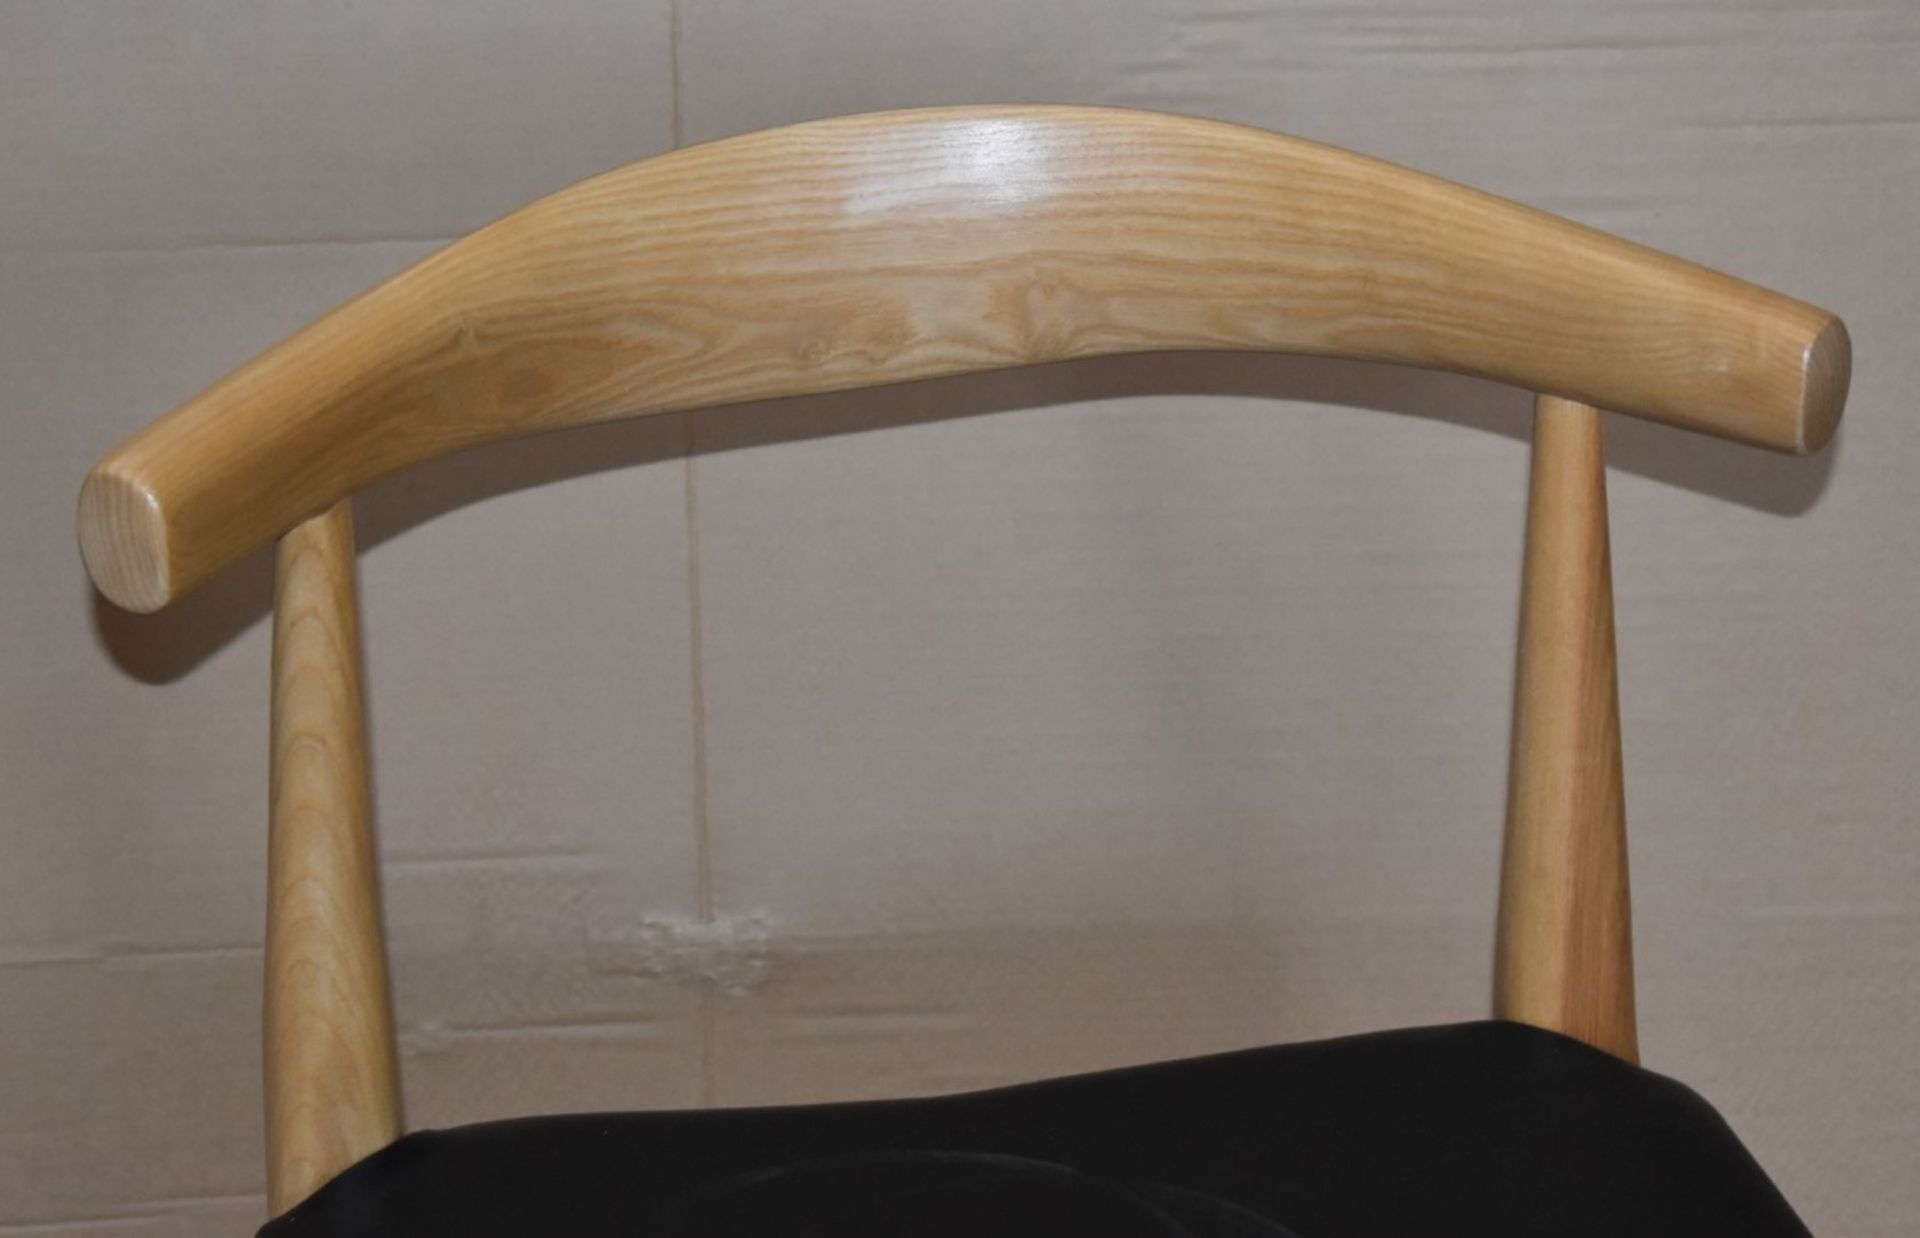 1 x Hans Wegner Inspired Elbow Chair - Solid Wood Chair With Light Stain Finish and Black Seat Pad - - Image 5 of 9